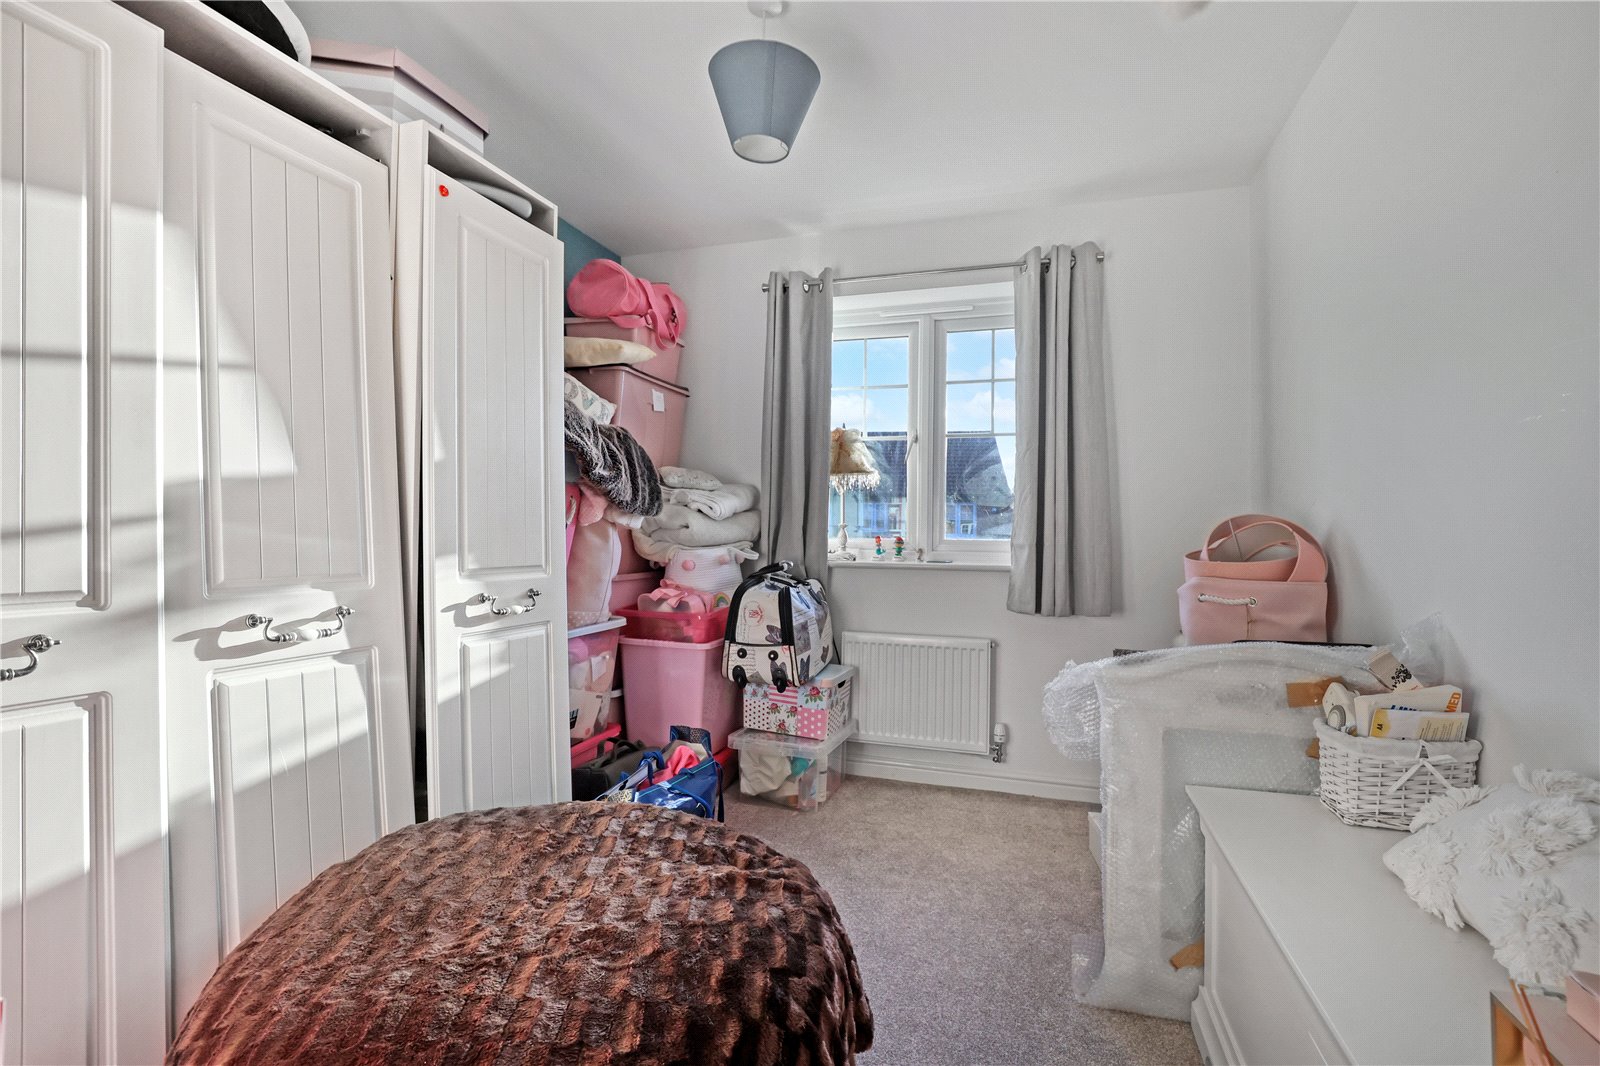 3 bed house for sale  - Property Image 11